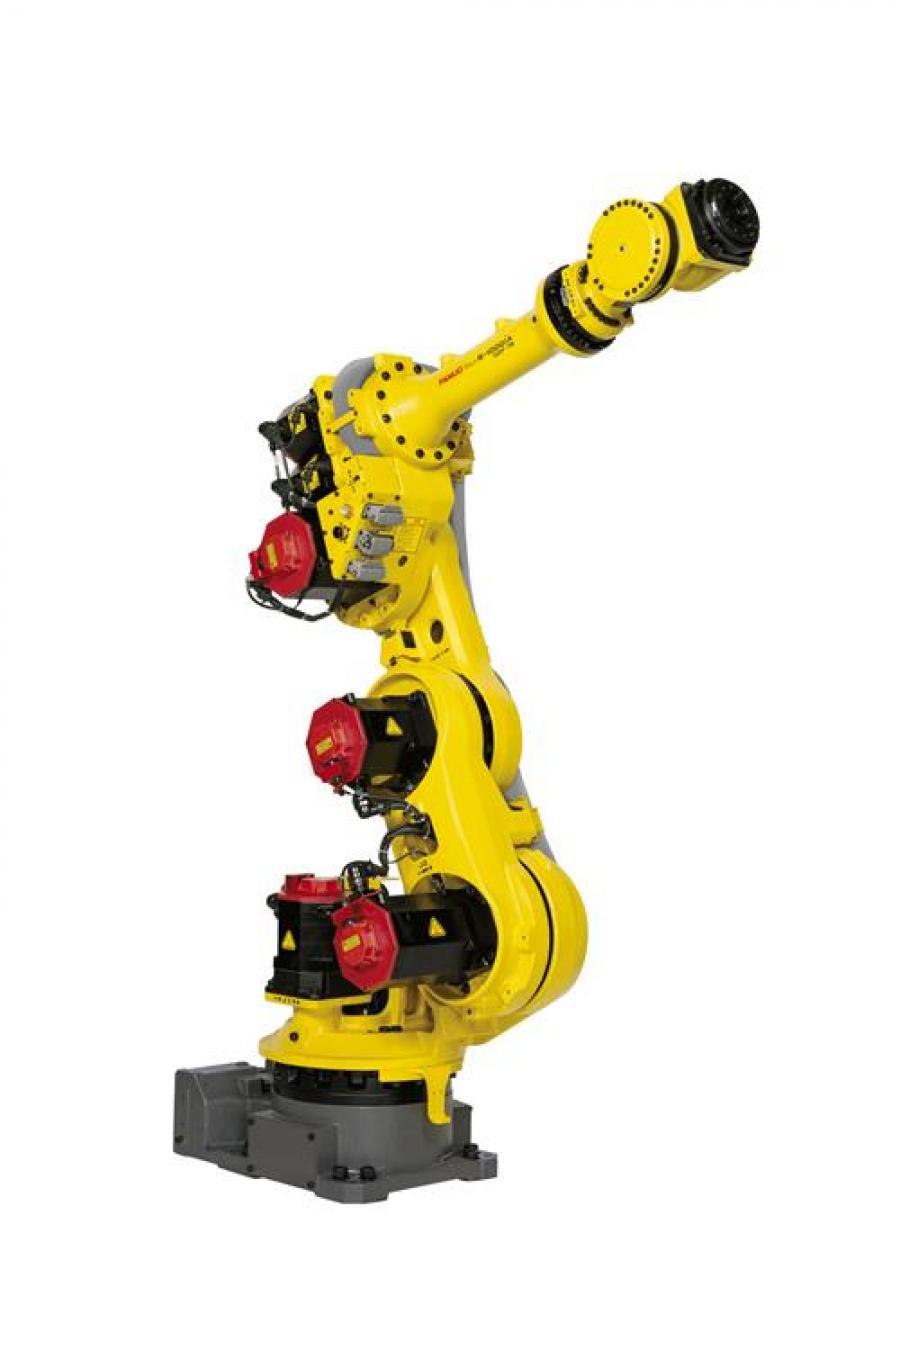 Fanuc launches new seven-axis robot for automotive spot weldingShare this story